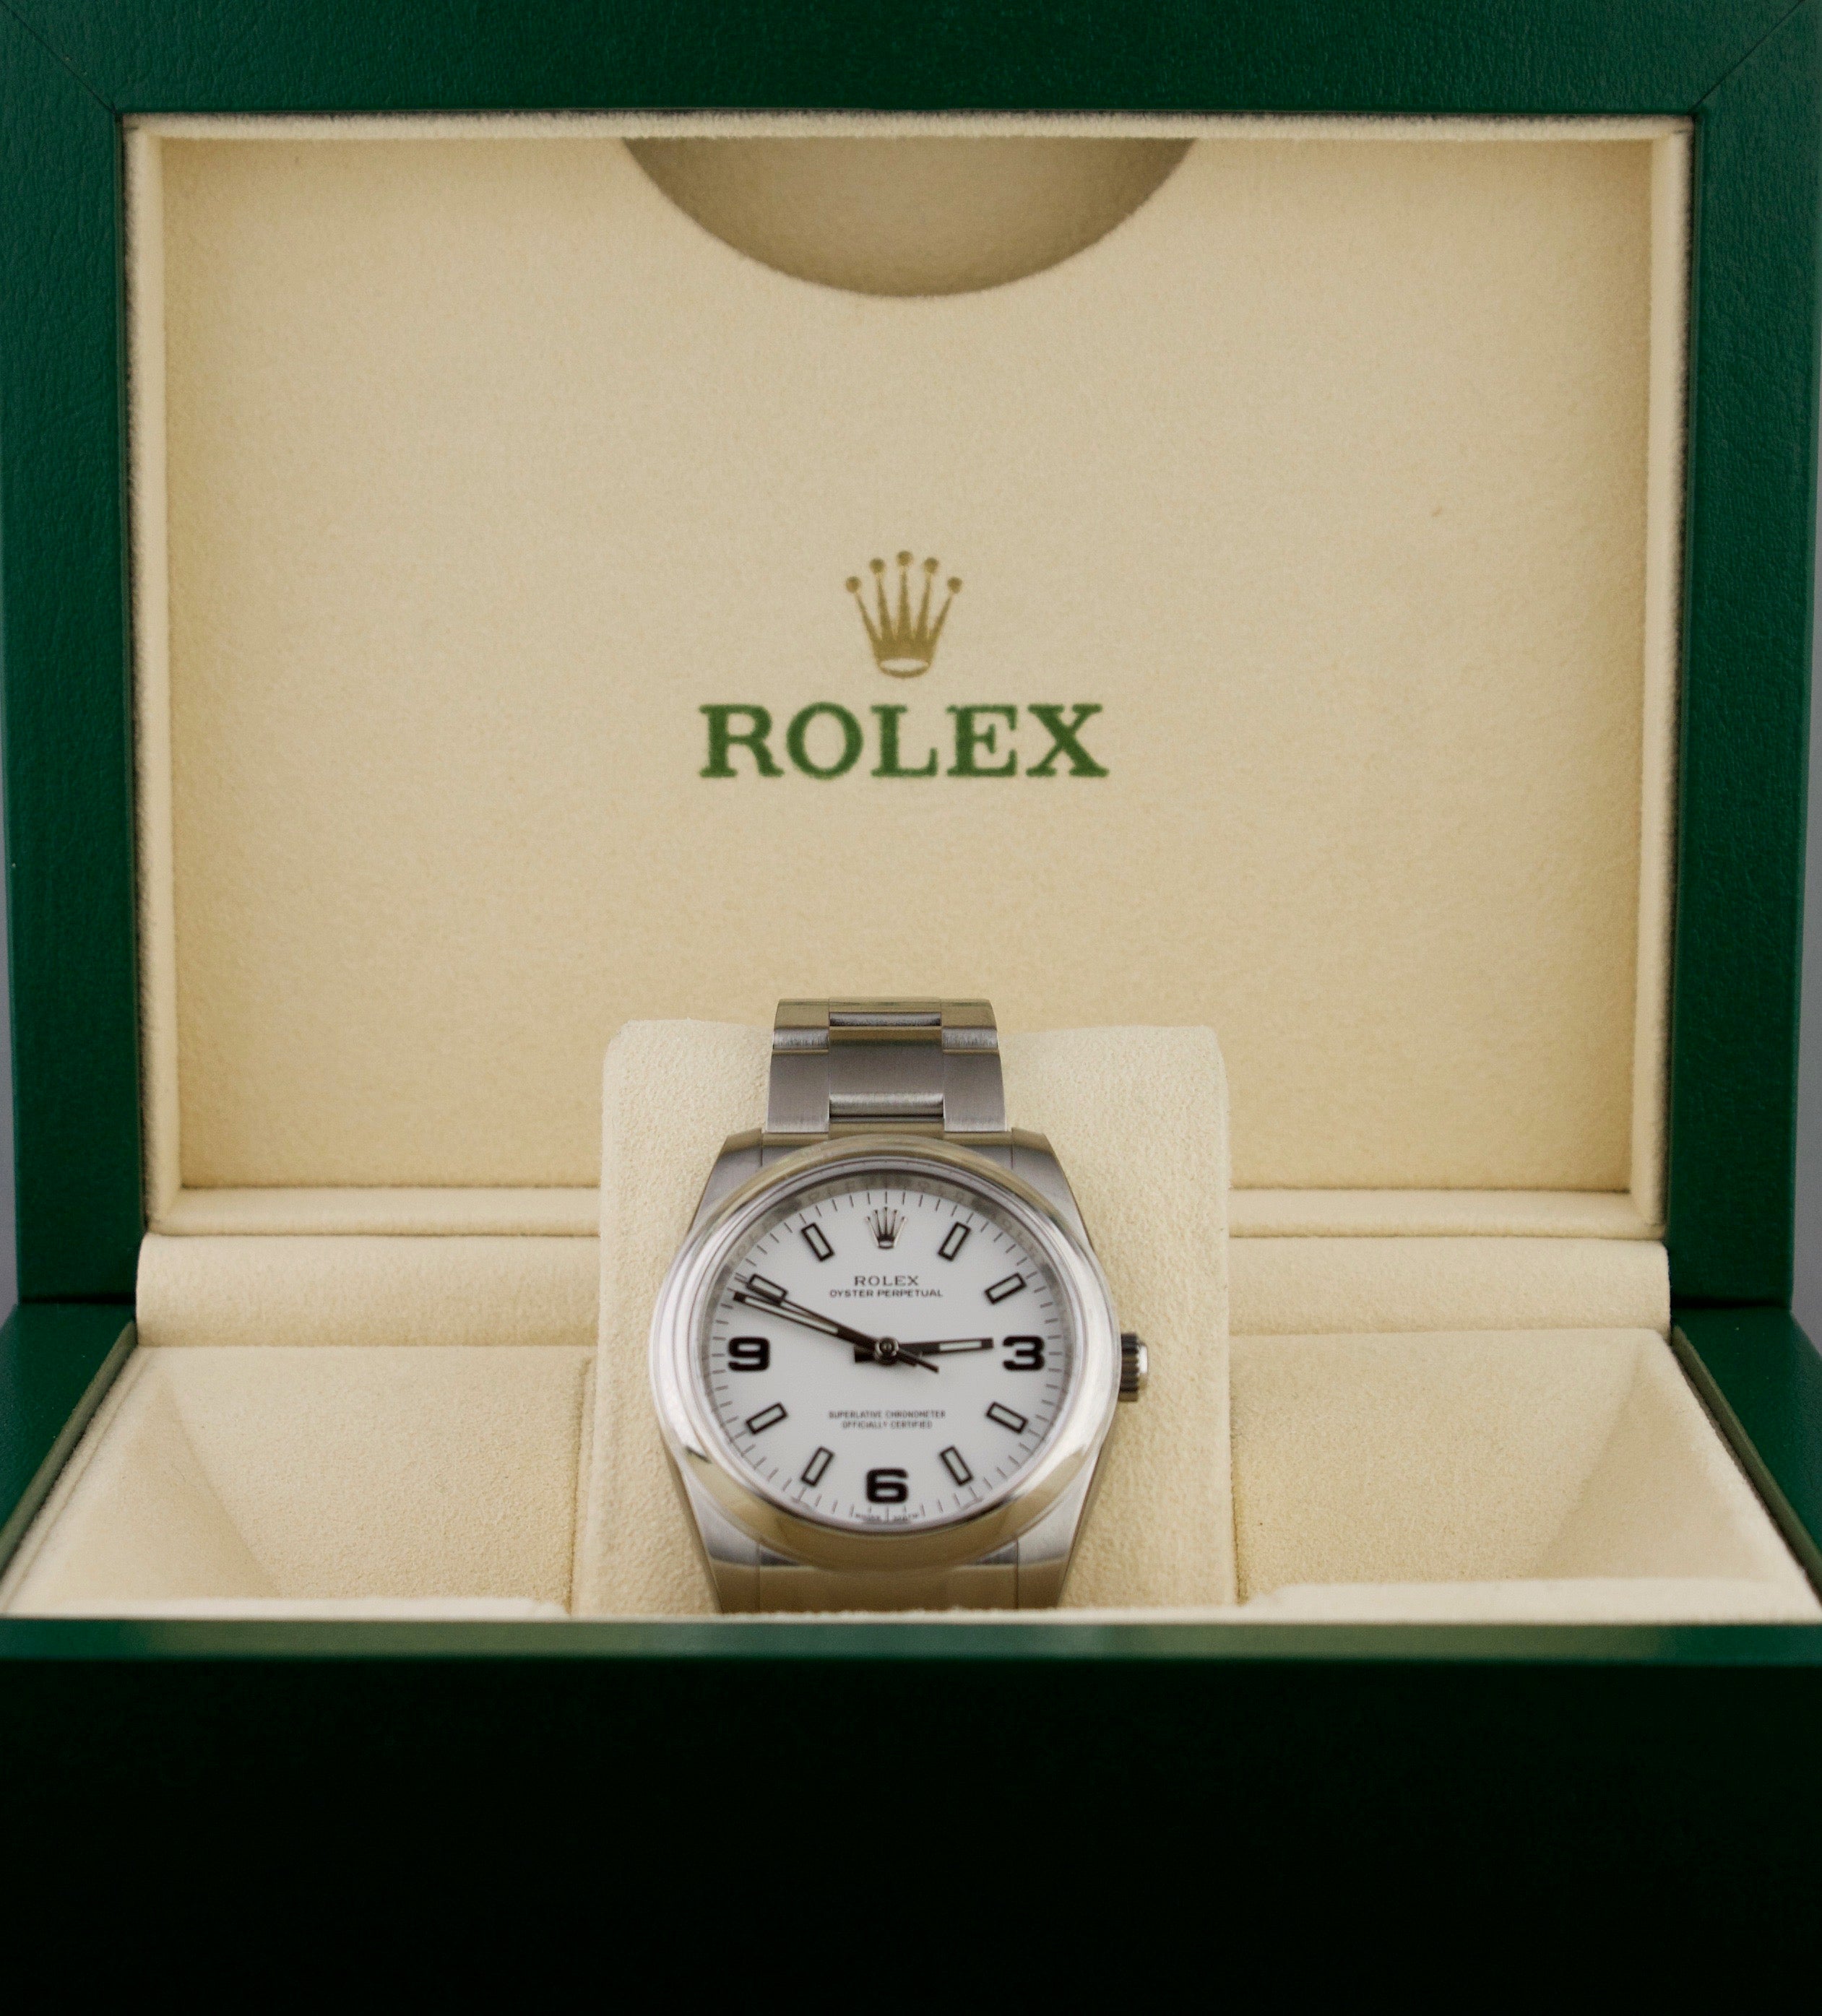 2014 BRAND NEW Rolex Oyster Perpetual 34mm White 114200 Stainless Engraved Watch